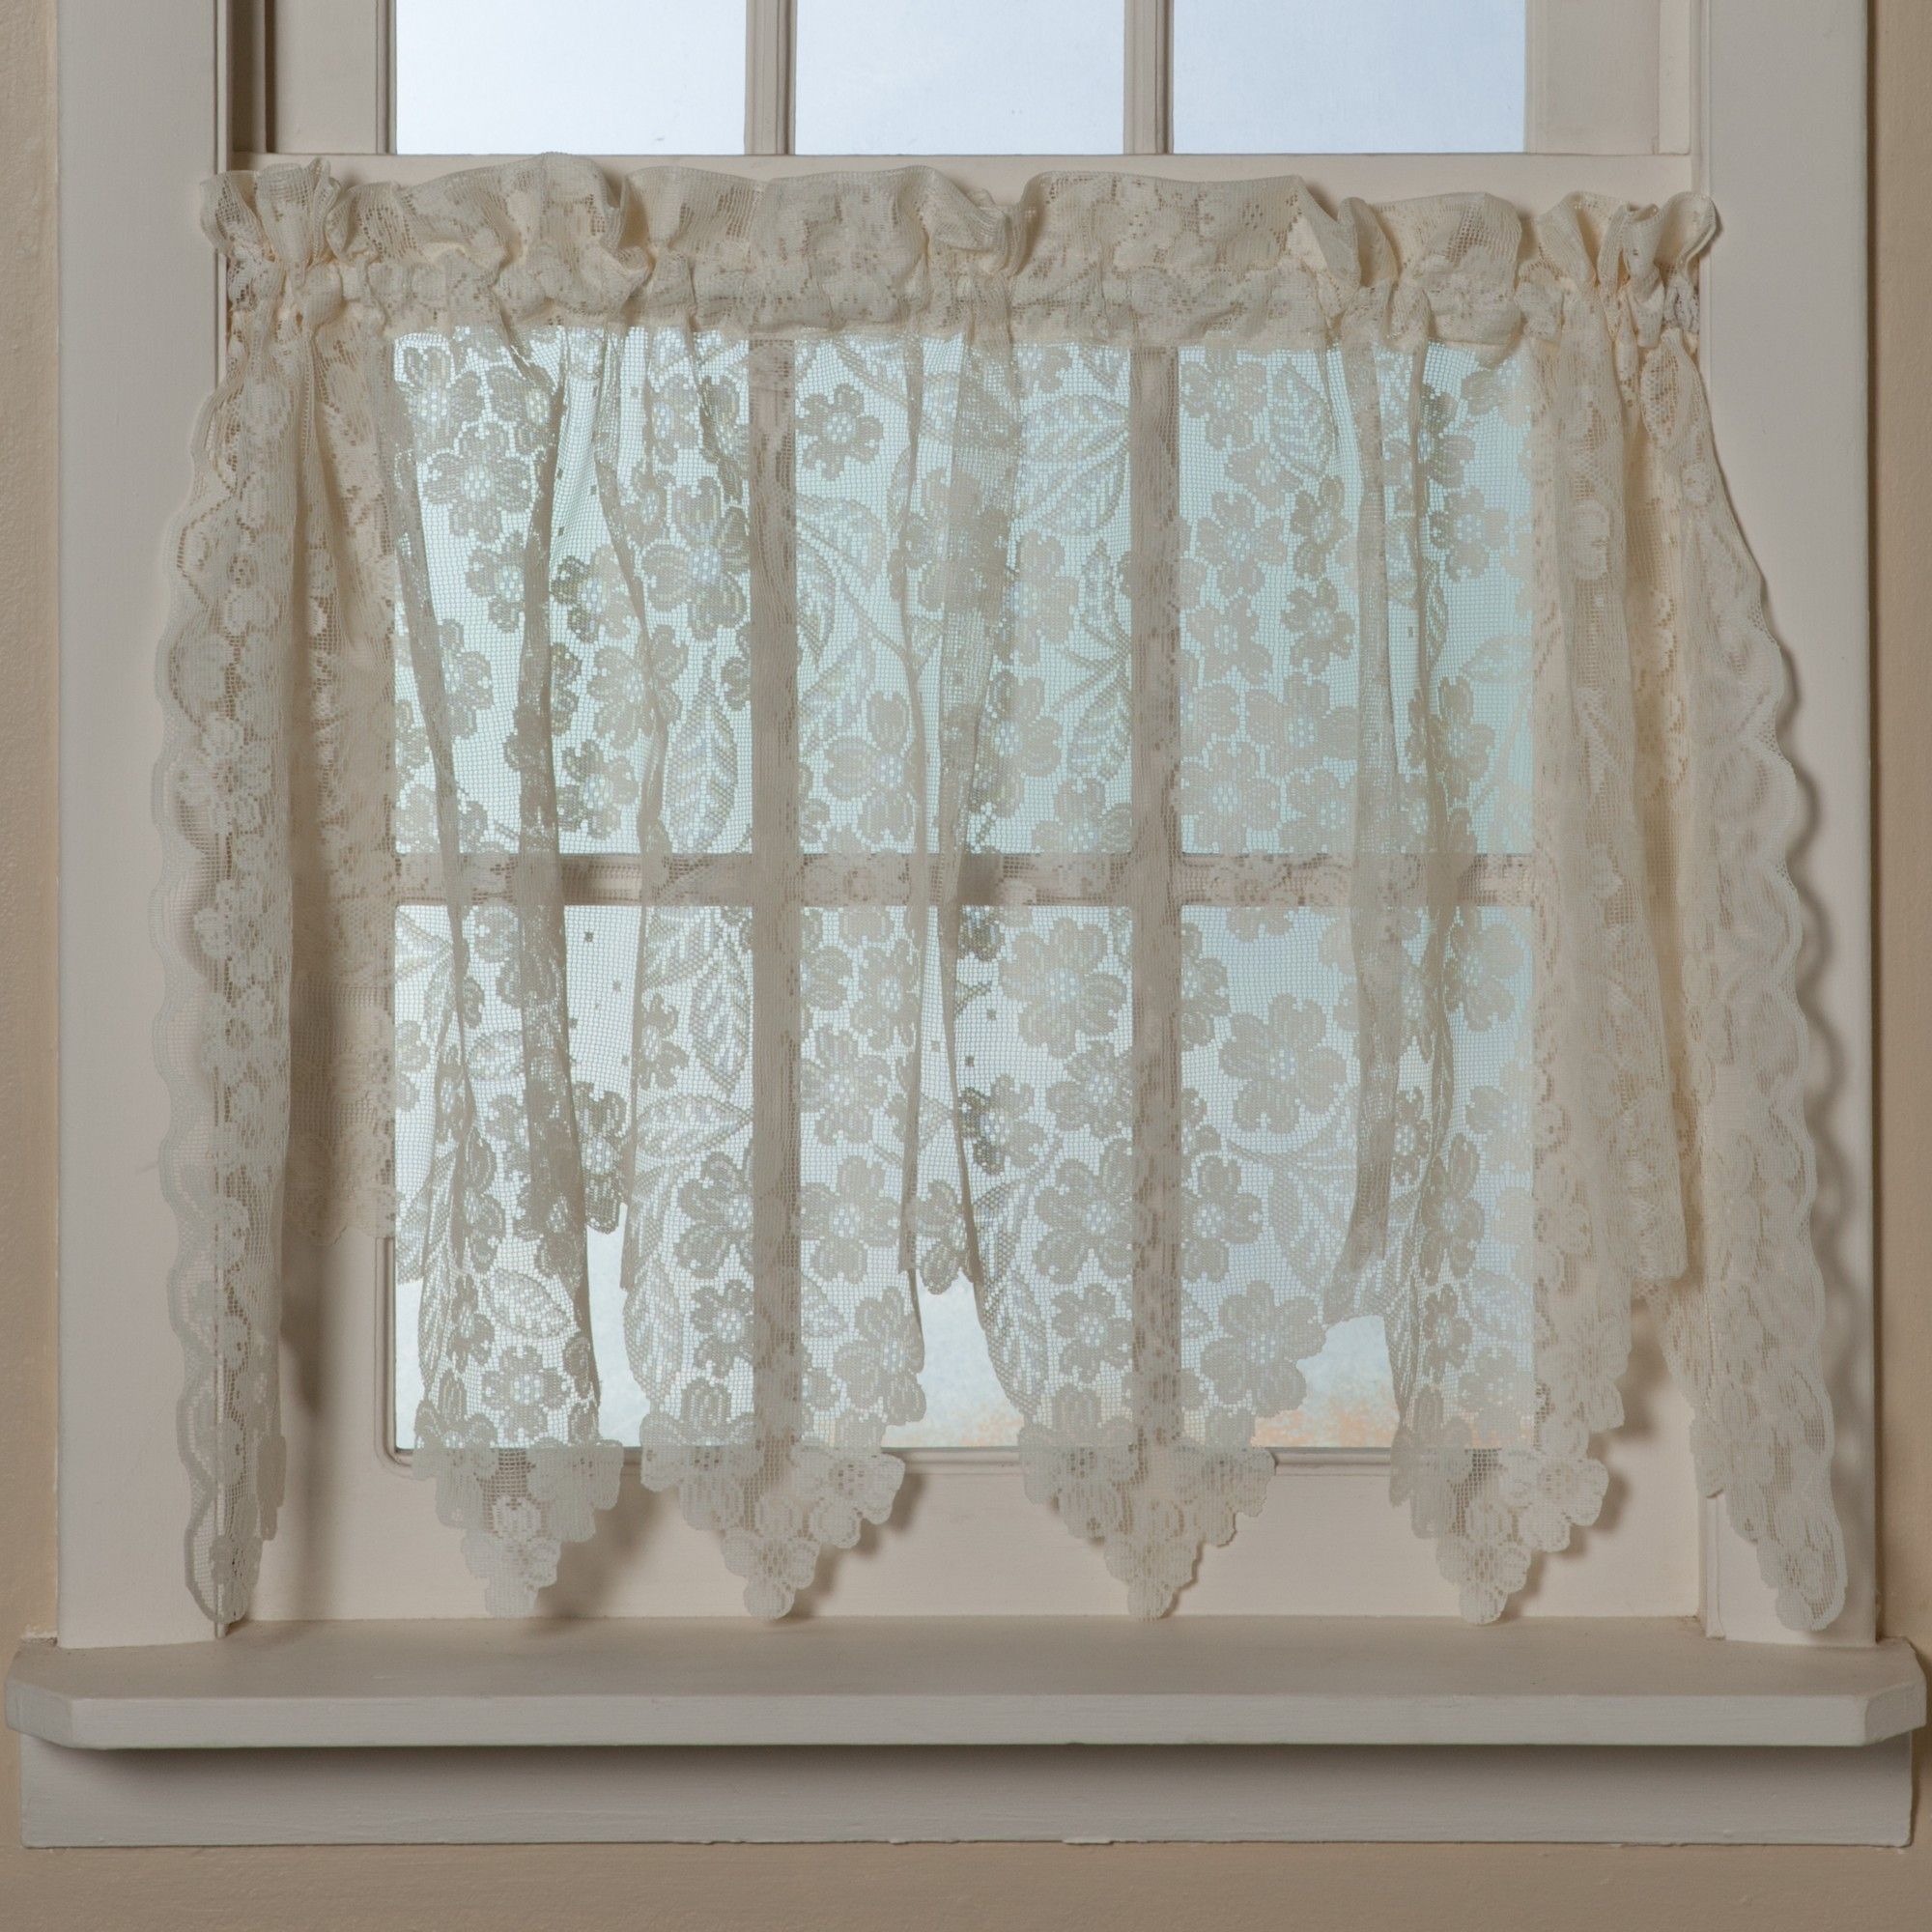 Ikea Lace Curtains Ideas Windows Curtains For Lace Curtains (View 23 of 25)